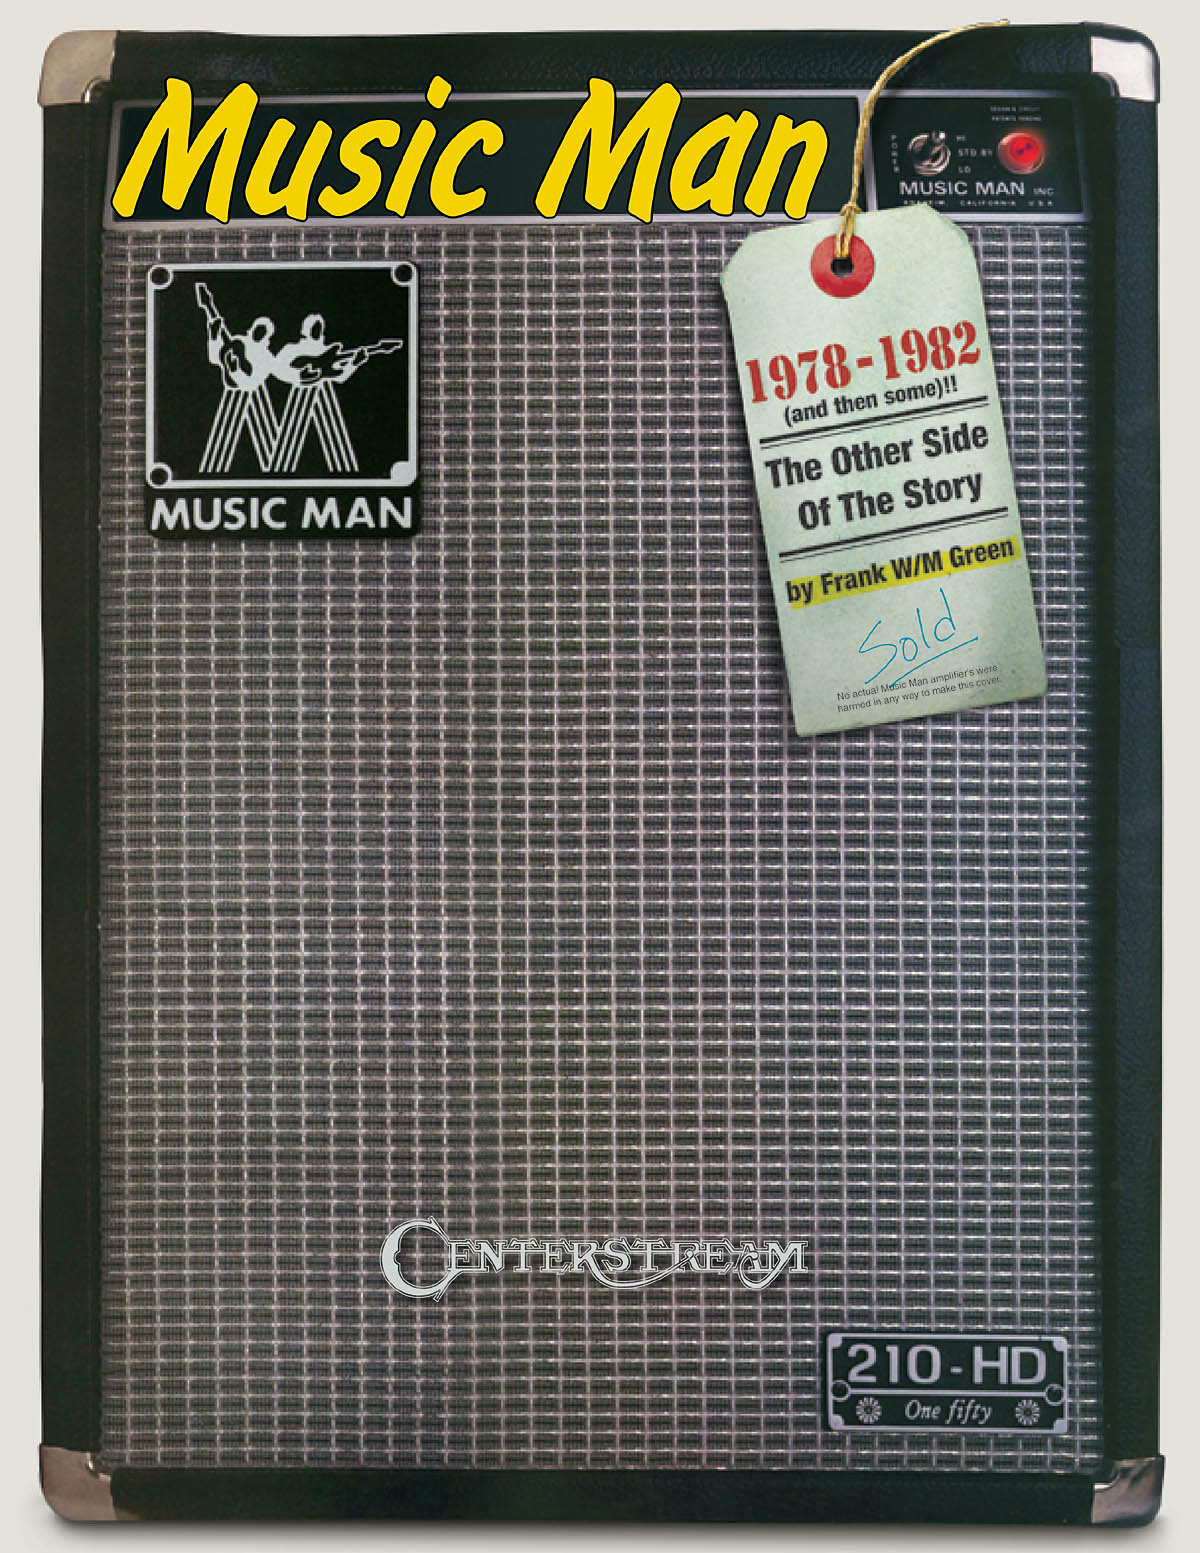 Music Man: 1978 to 1982 (And Then Some!): Reference Books